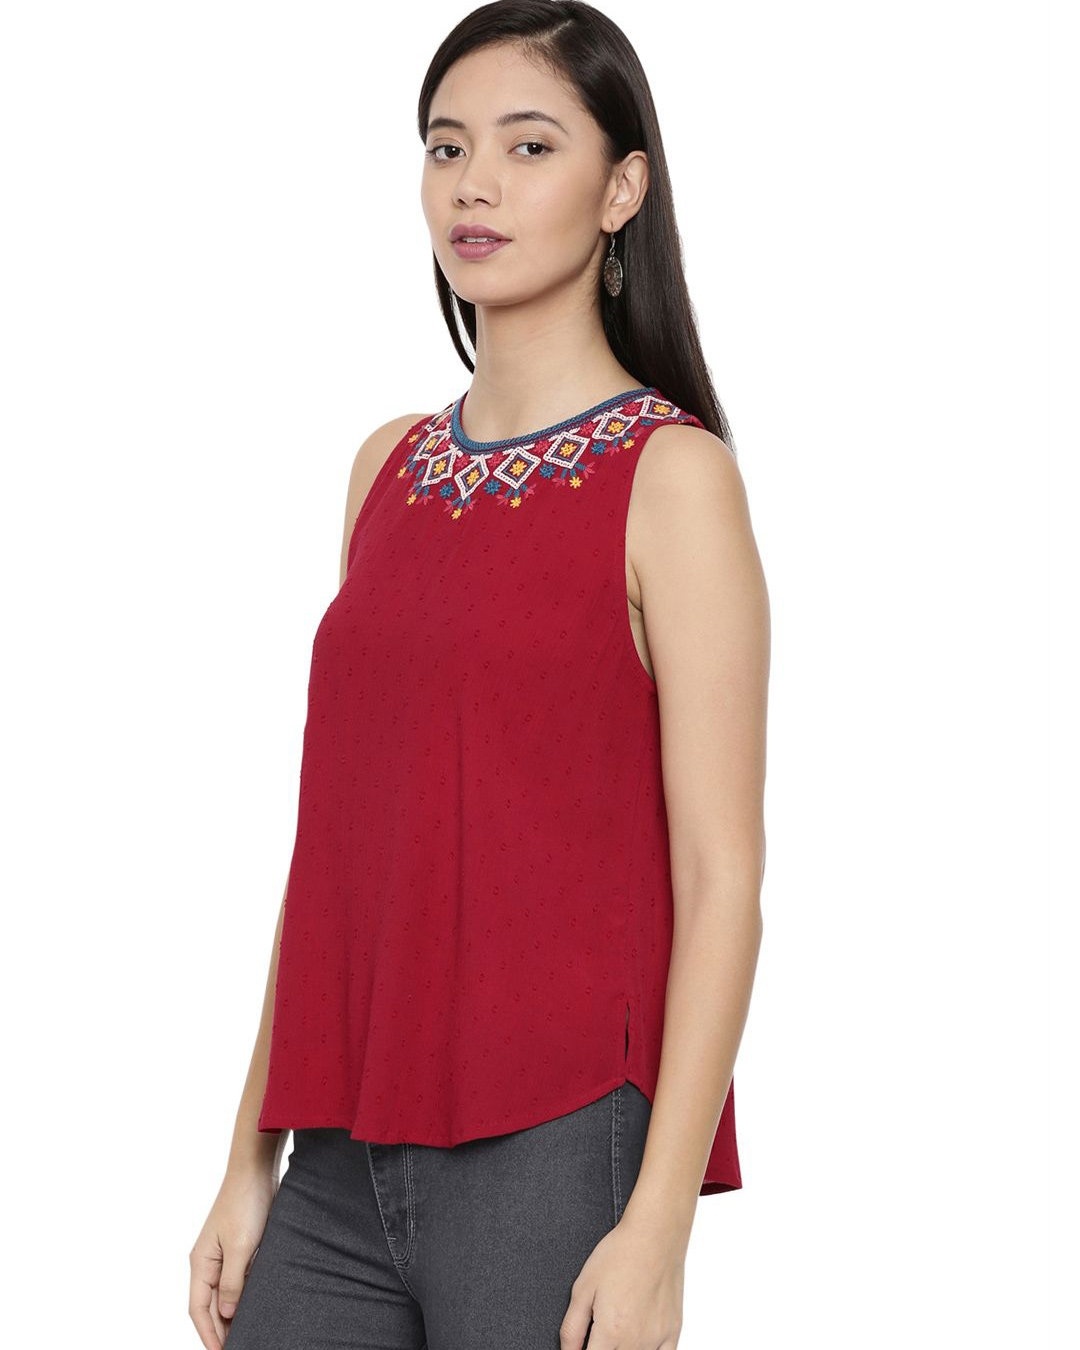 Shop Women's Red Floral Print Sleeveless Top-Back